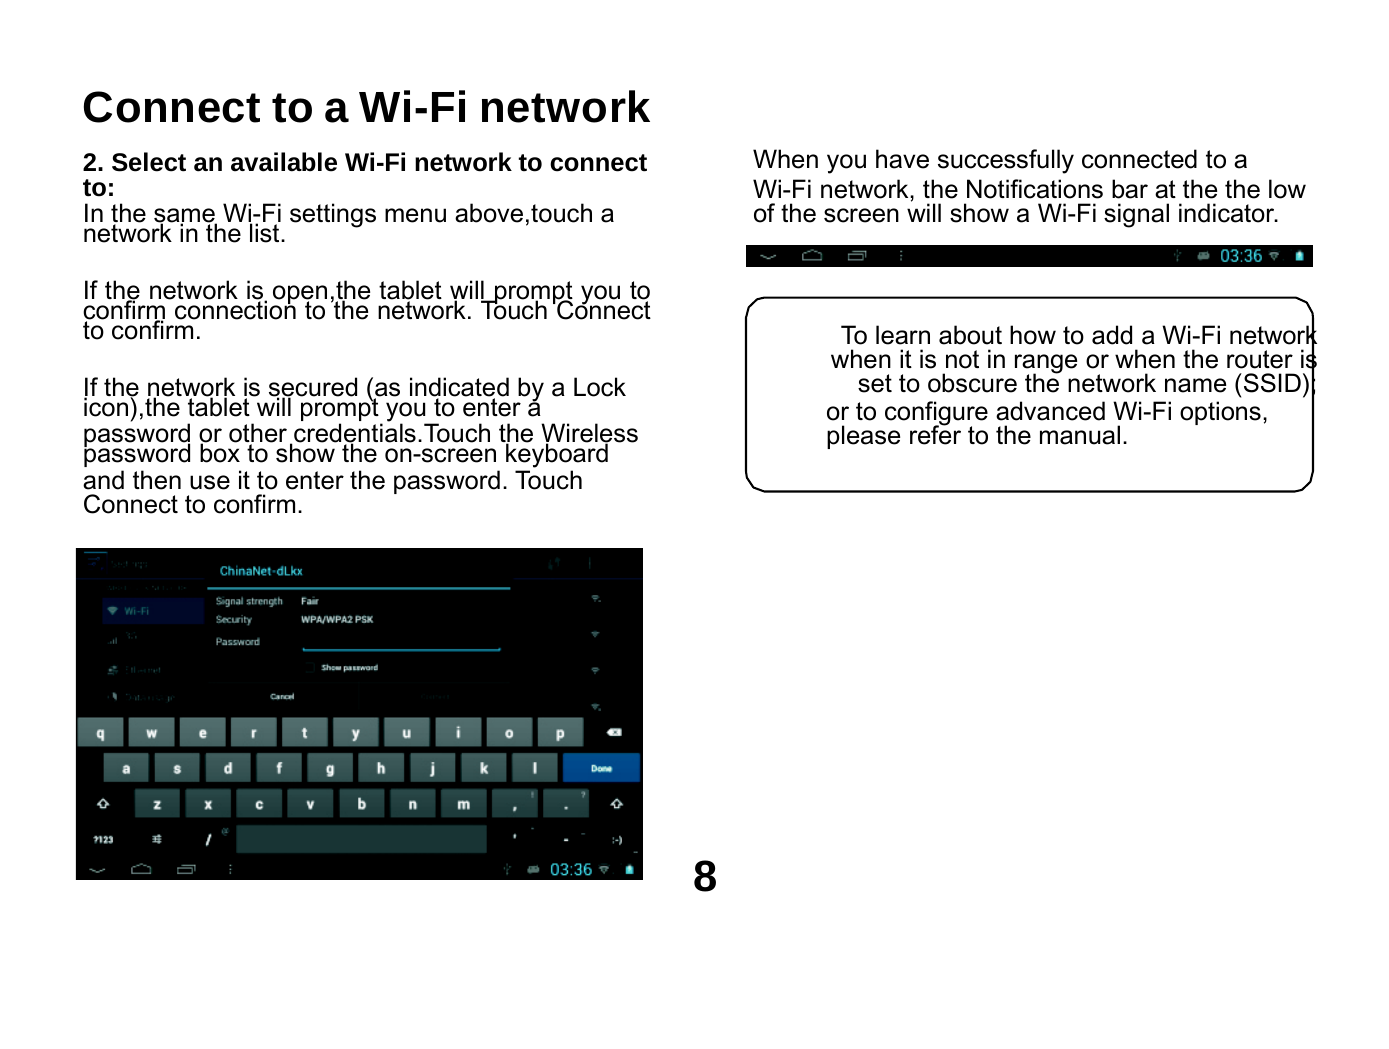     Connect to a Wi-Fi network  2. Select an available Wi-Fi network to connect to: In the same Wi-Fi settings menu above,touch a network in the list.  If the network is open,the tablet will prompt you to confirm connection to the network. Touch Connect to confirm.  If the network is secured (as indicated by a Lock icon),the tablet will prompt you to enter a password or other credentials.Touch the Wireless password box to show the on-screen keyboard and then use it to enter the password. Touch Connect to confirm.  When you have successfully connected to a Wi-Fi network, the Notifications bar at the the low of the screen will show a Wi-Fi signal indicator.    To learn about how to add a Wi-Fi network when it is not in range or when the router is set to obscure the network name (SSID); or to configure advanced Wi-Fi options, please refer to the manual.          8 